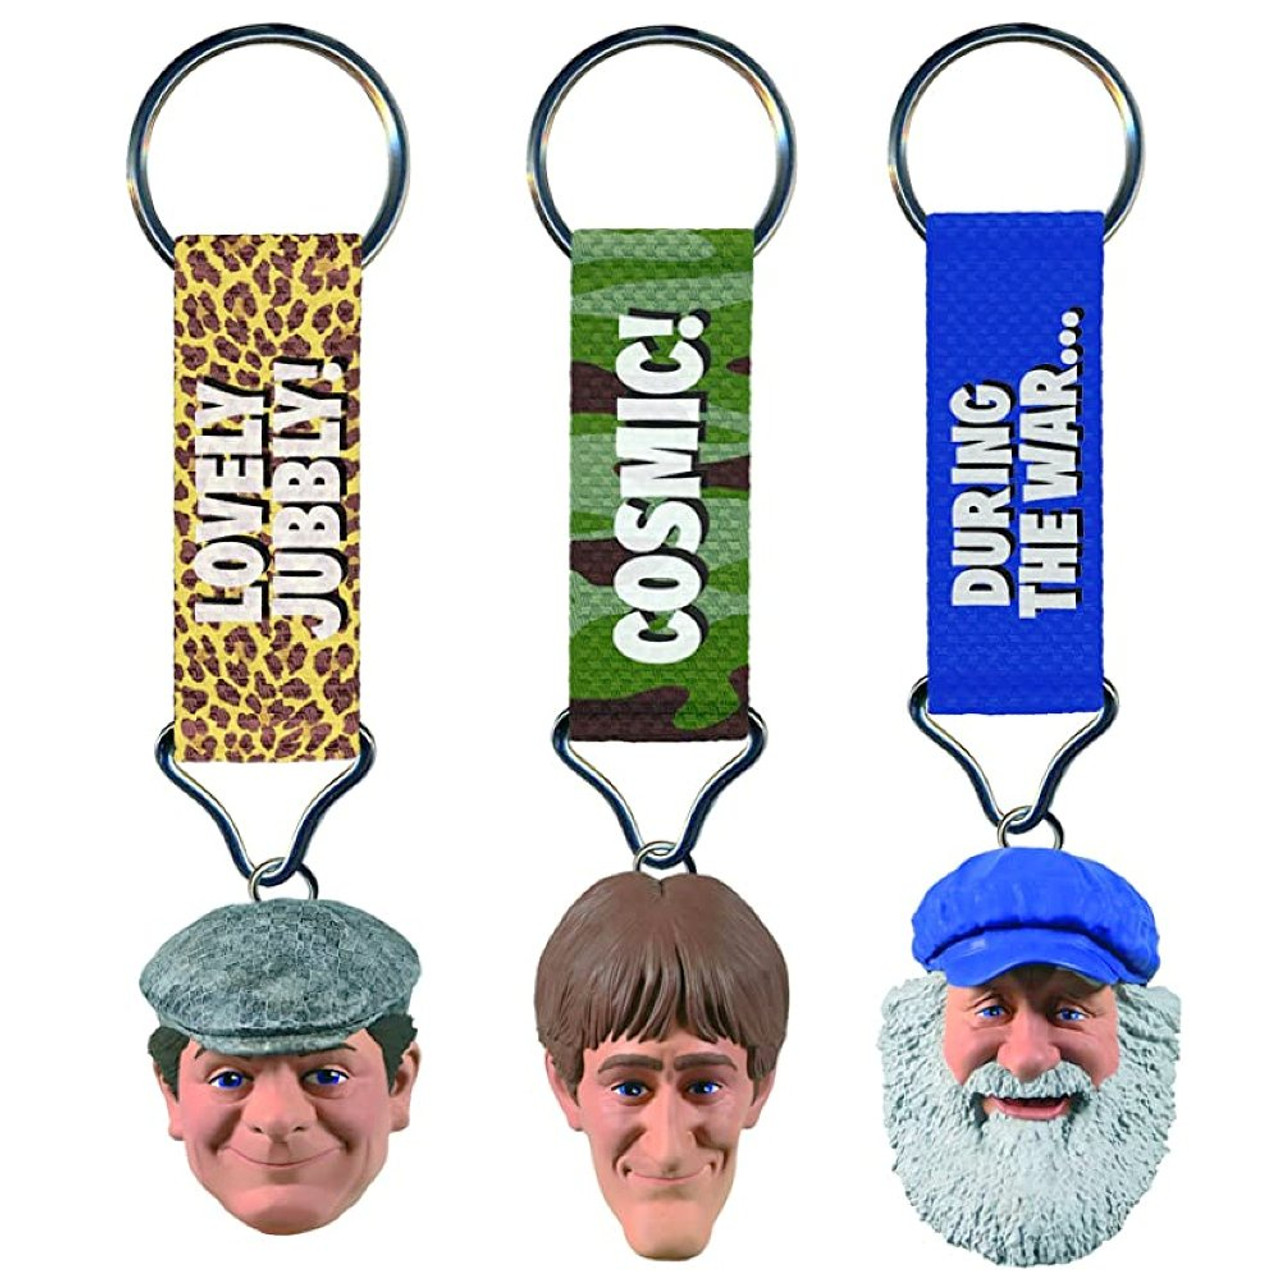 Only Fools and Horses Lanyard Key Chain - Retroble